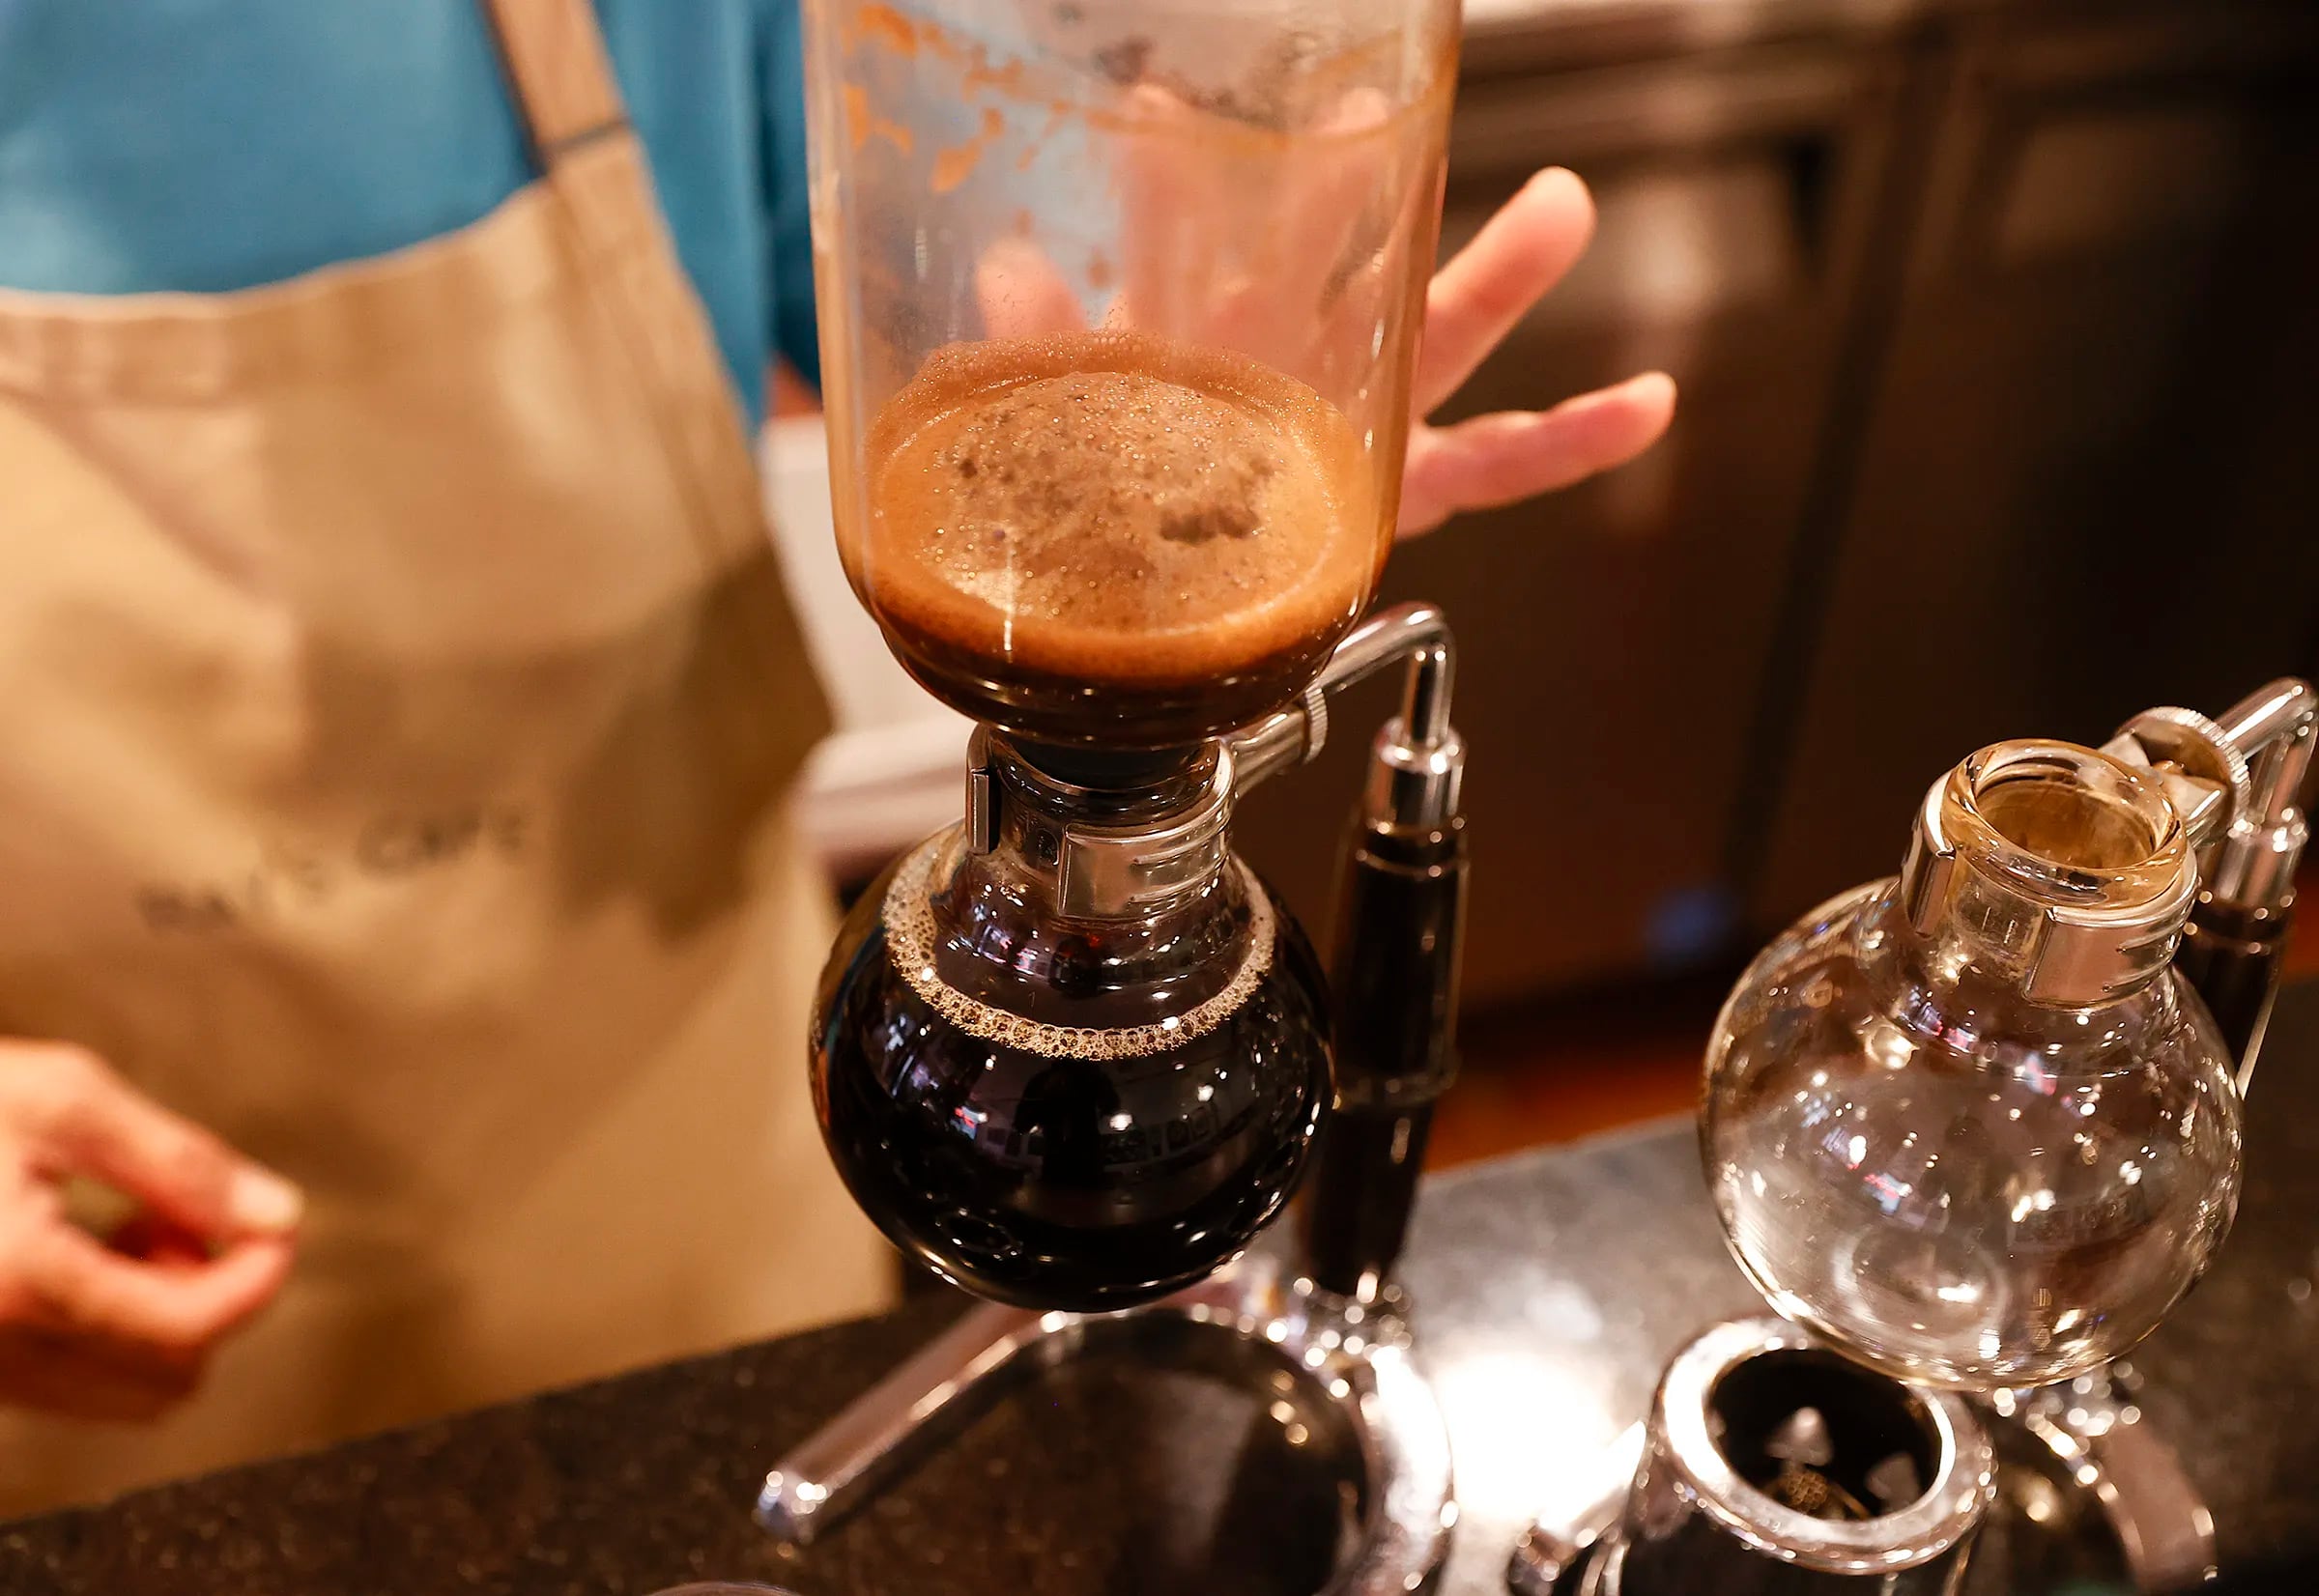 Ray’s Cafe & Tea House owner Grace Chen makes a cup of siphon coffee in the Chinatown coffeehouse.